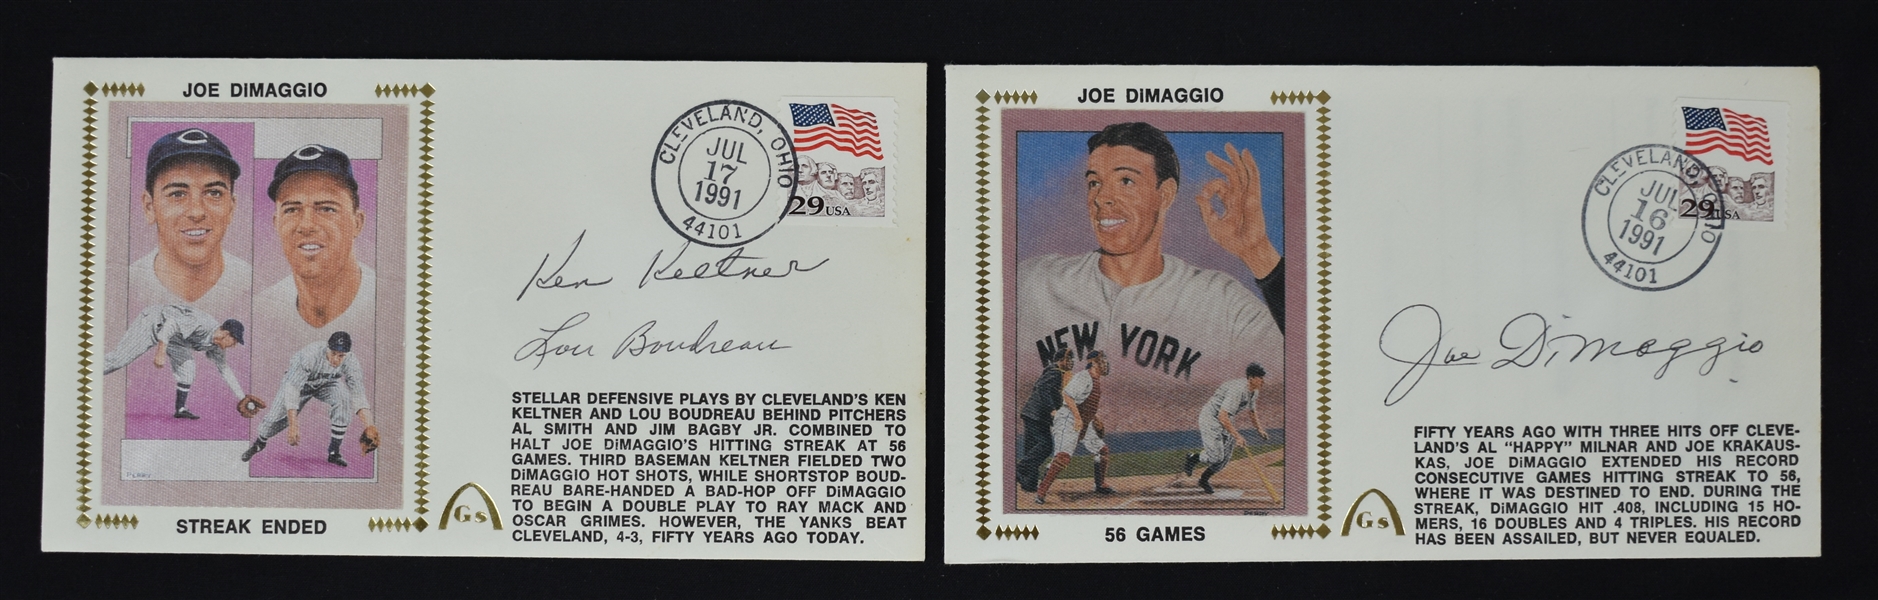 Joe DiMaggio "The Streak" Autographed First Day Covers 